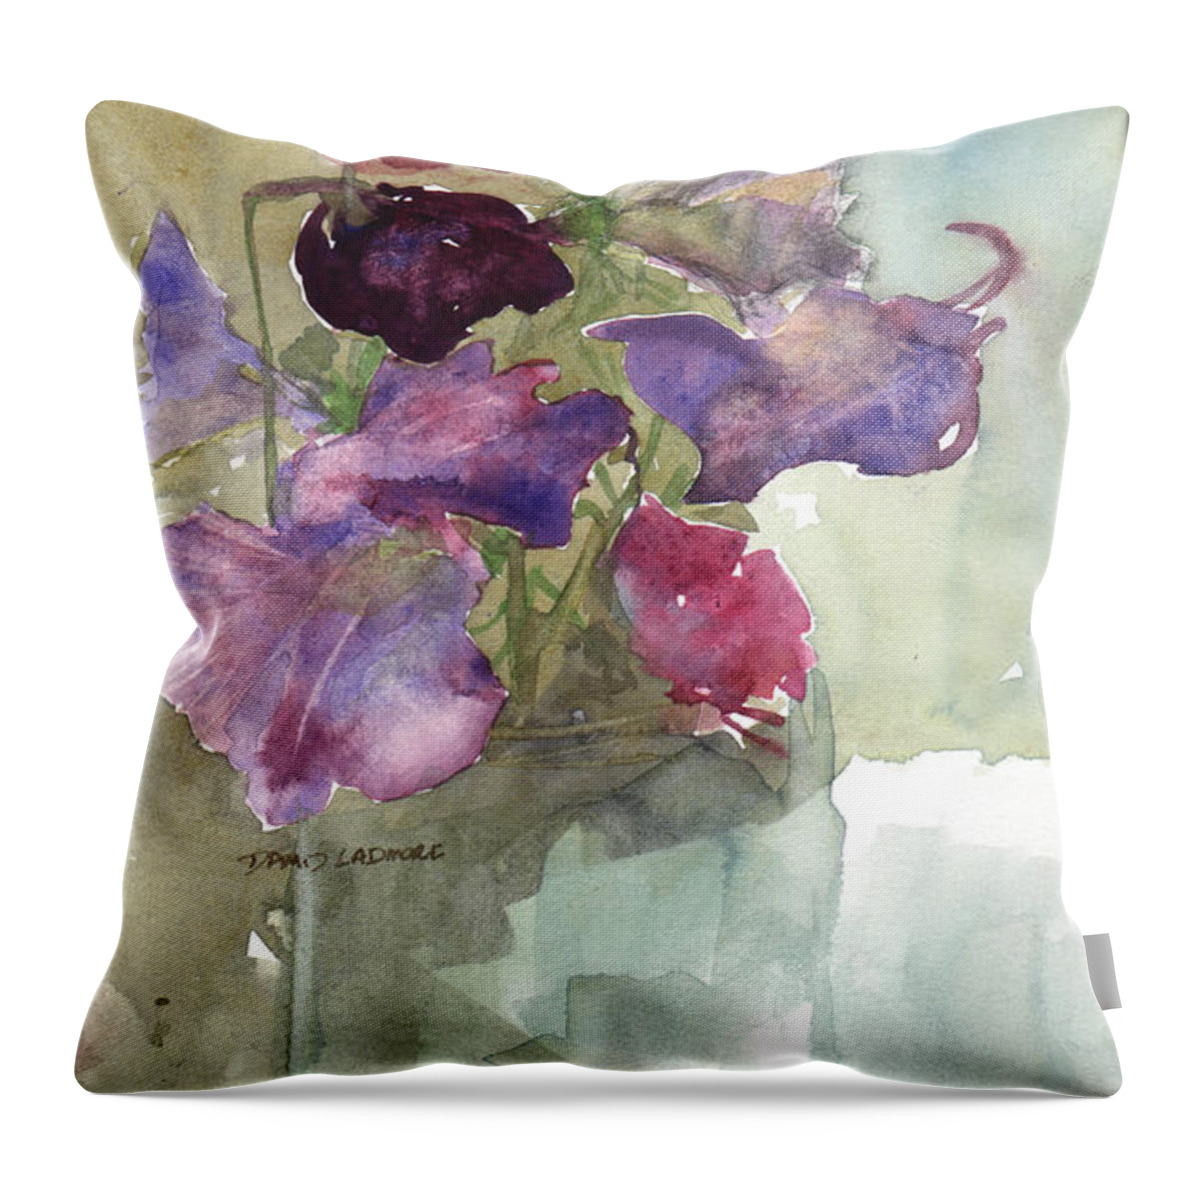 Sweetpeas Throw Pillow featuring the painting Sweetpeas 3 by David Ladmore